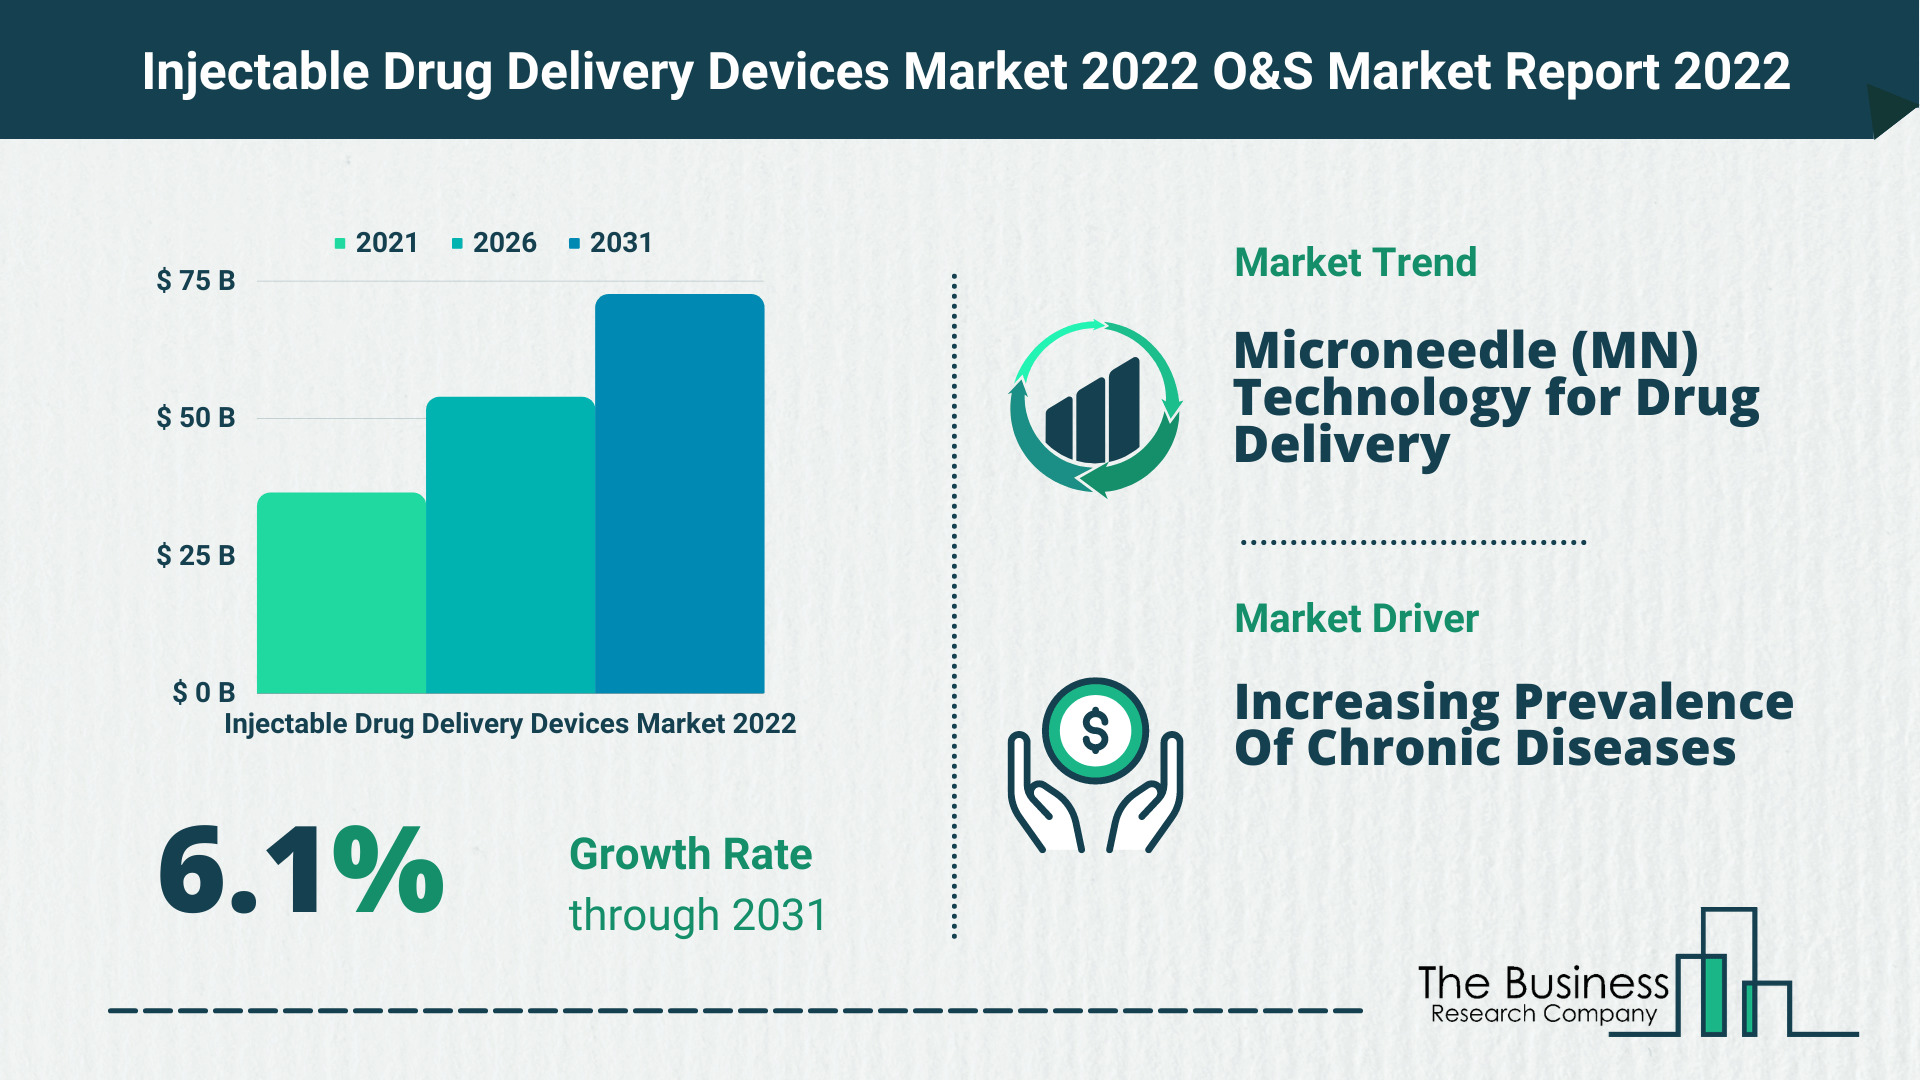 Global Injectable Drug Delivery Devices Market 2022 – Market Opportunities And Strategies